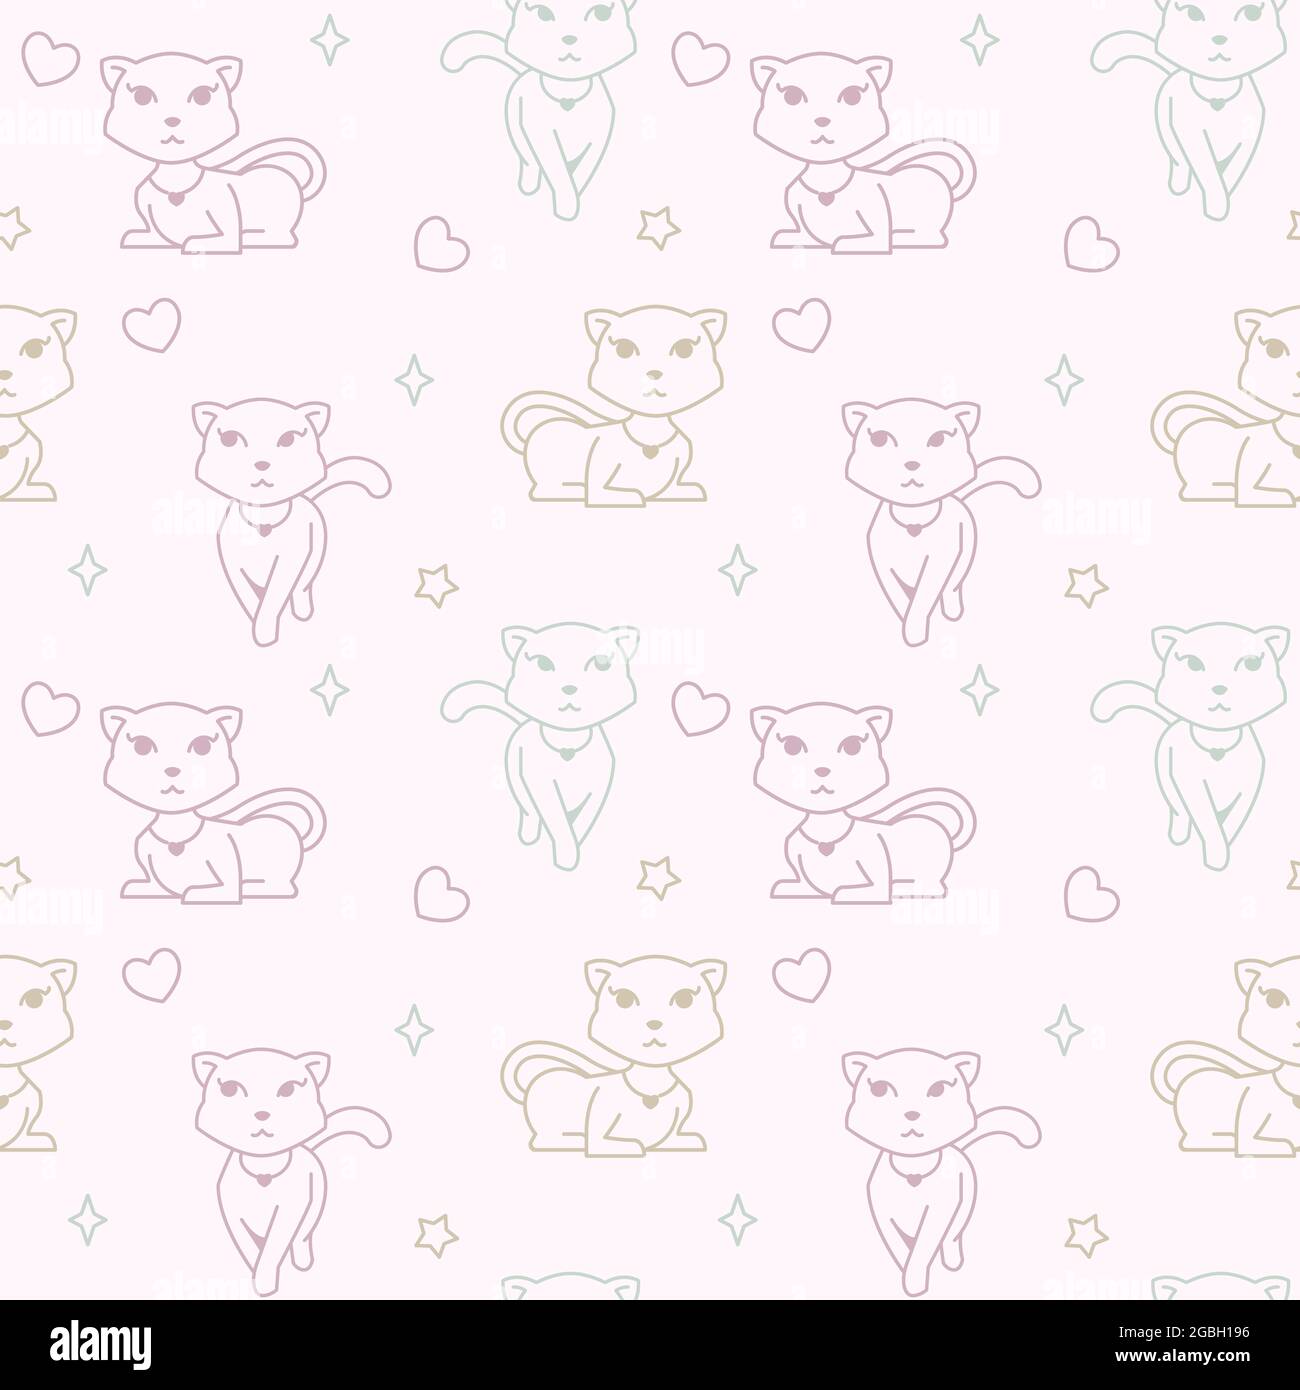 Beautiful Cat Seamless Pattern Texture Background Wrapping Ornament Stock Vector